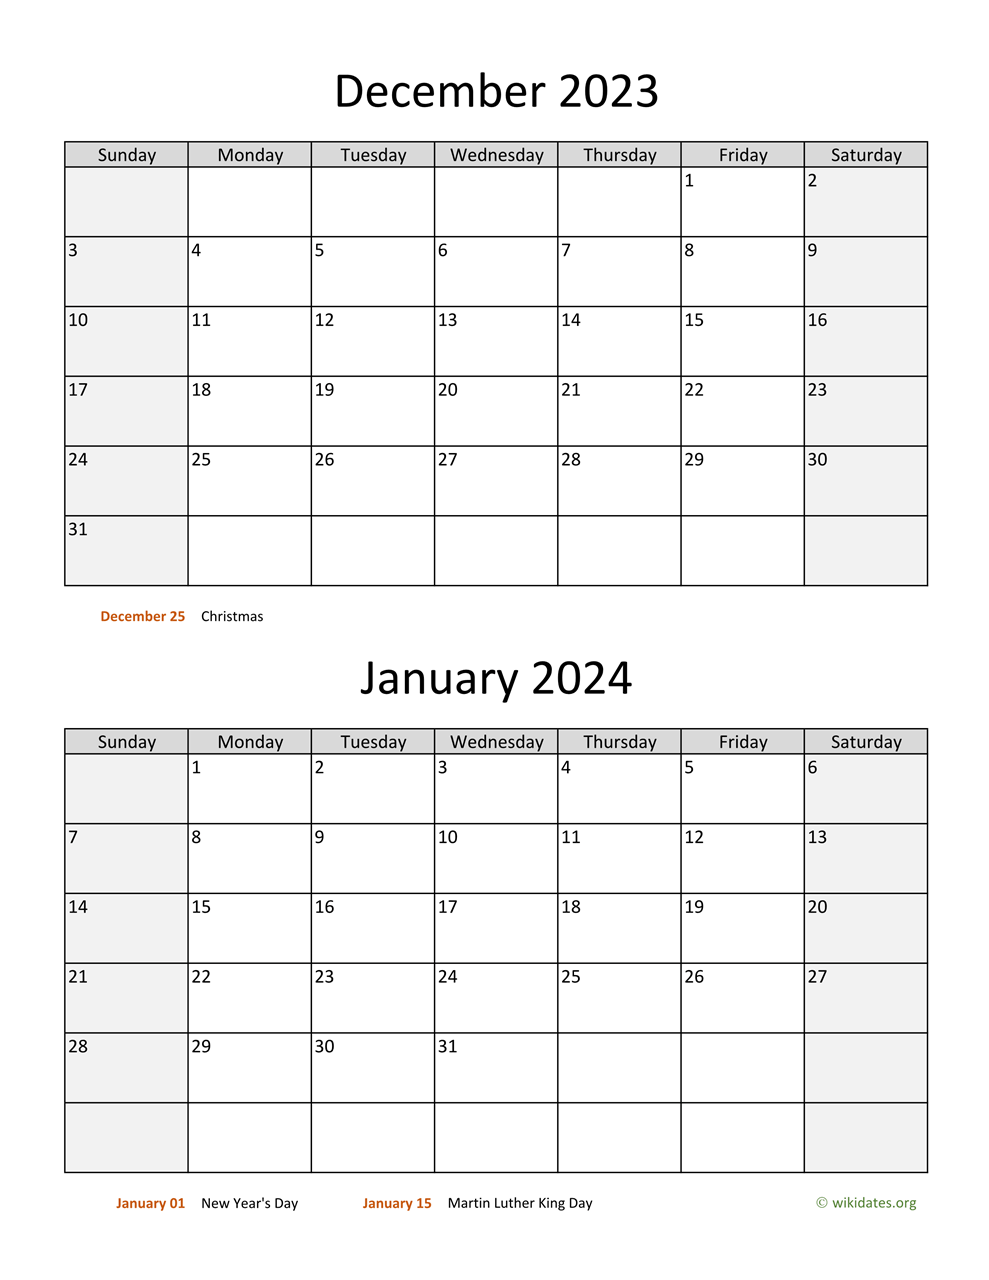 December 2023 And January 2024 Calendar | Wikidates for Printable Monthly Calendar December 2023 And January 2024